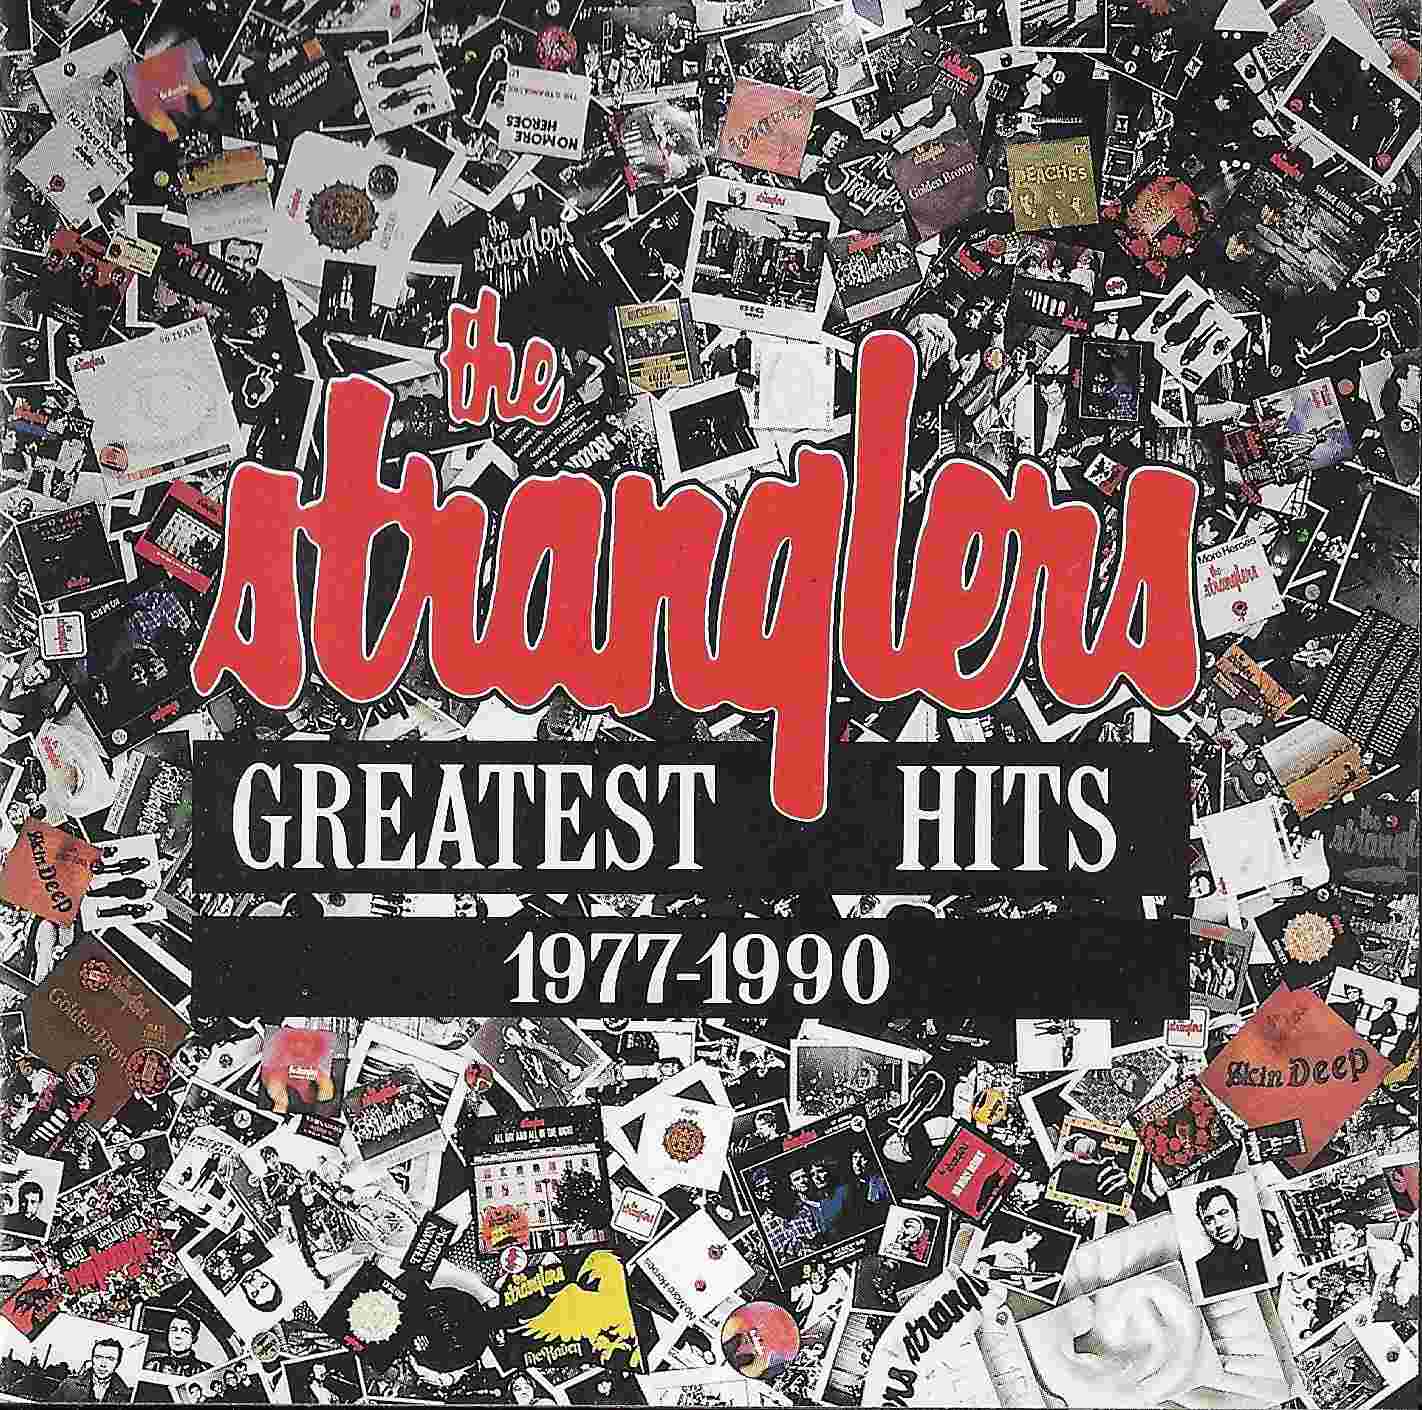 Picture of 467541 2 Greatest hits 1977 - 1990 by artist The Stranglers from The Stranglers